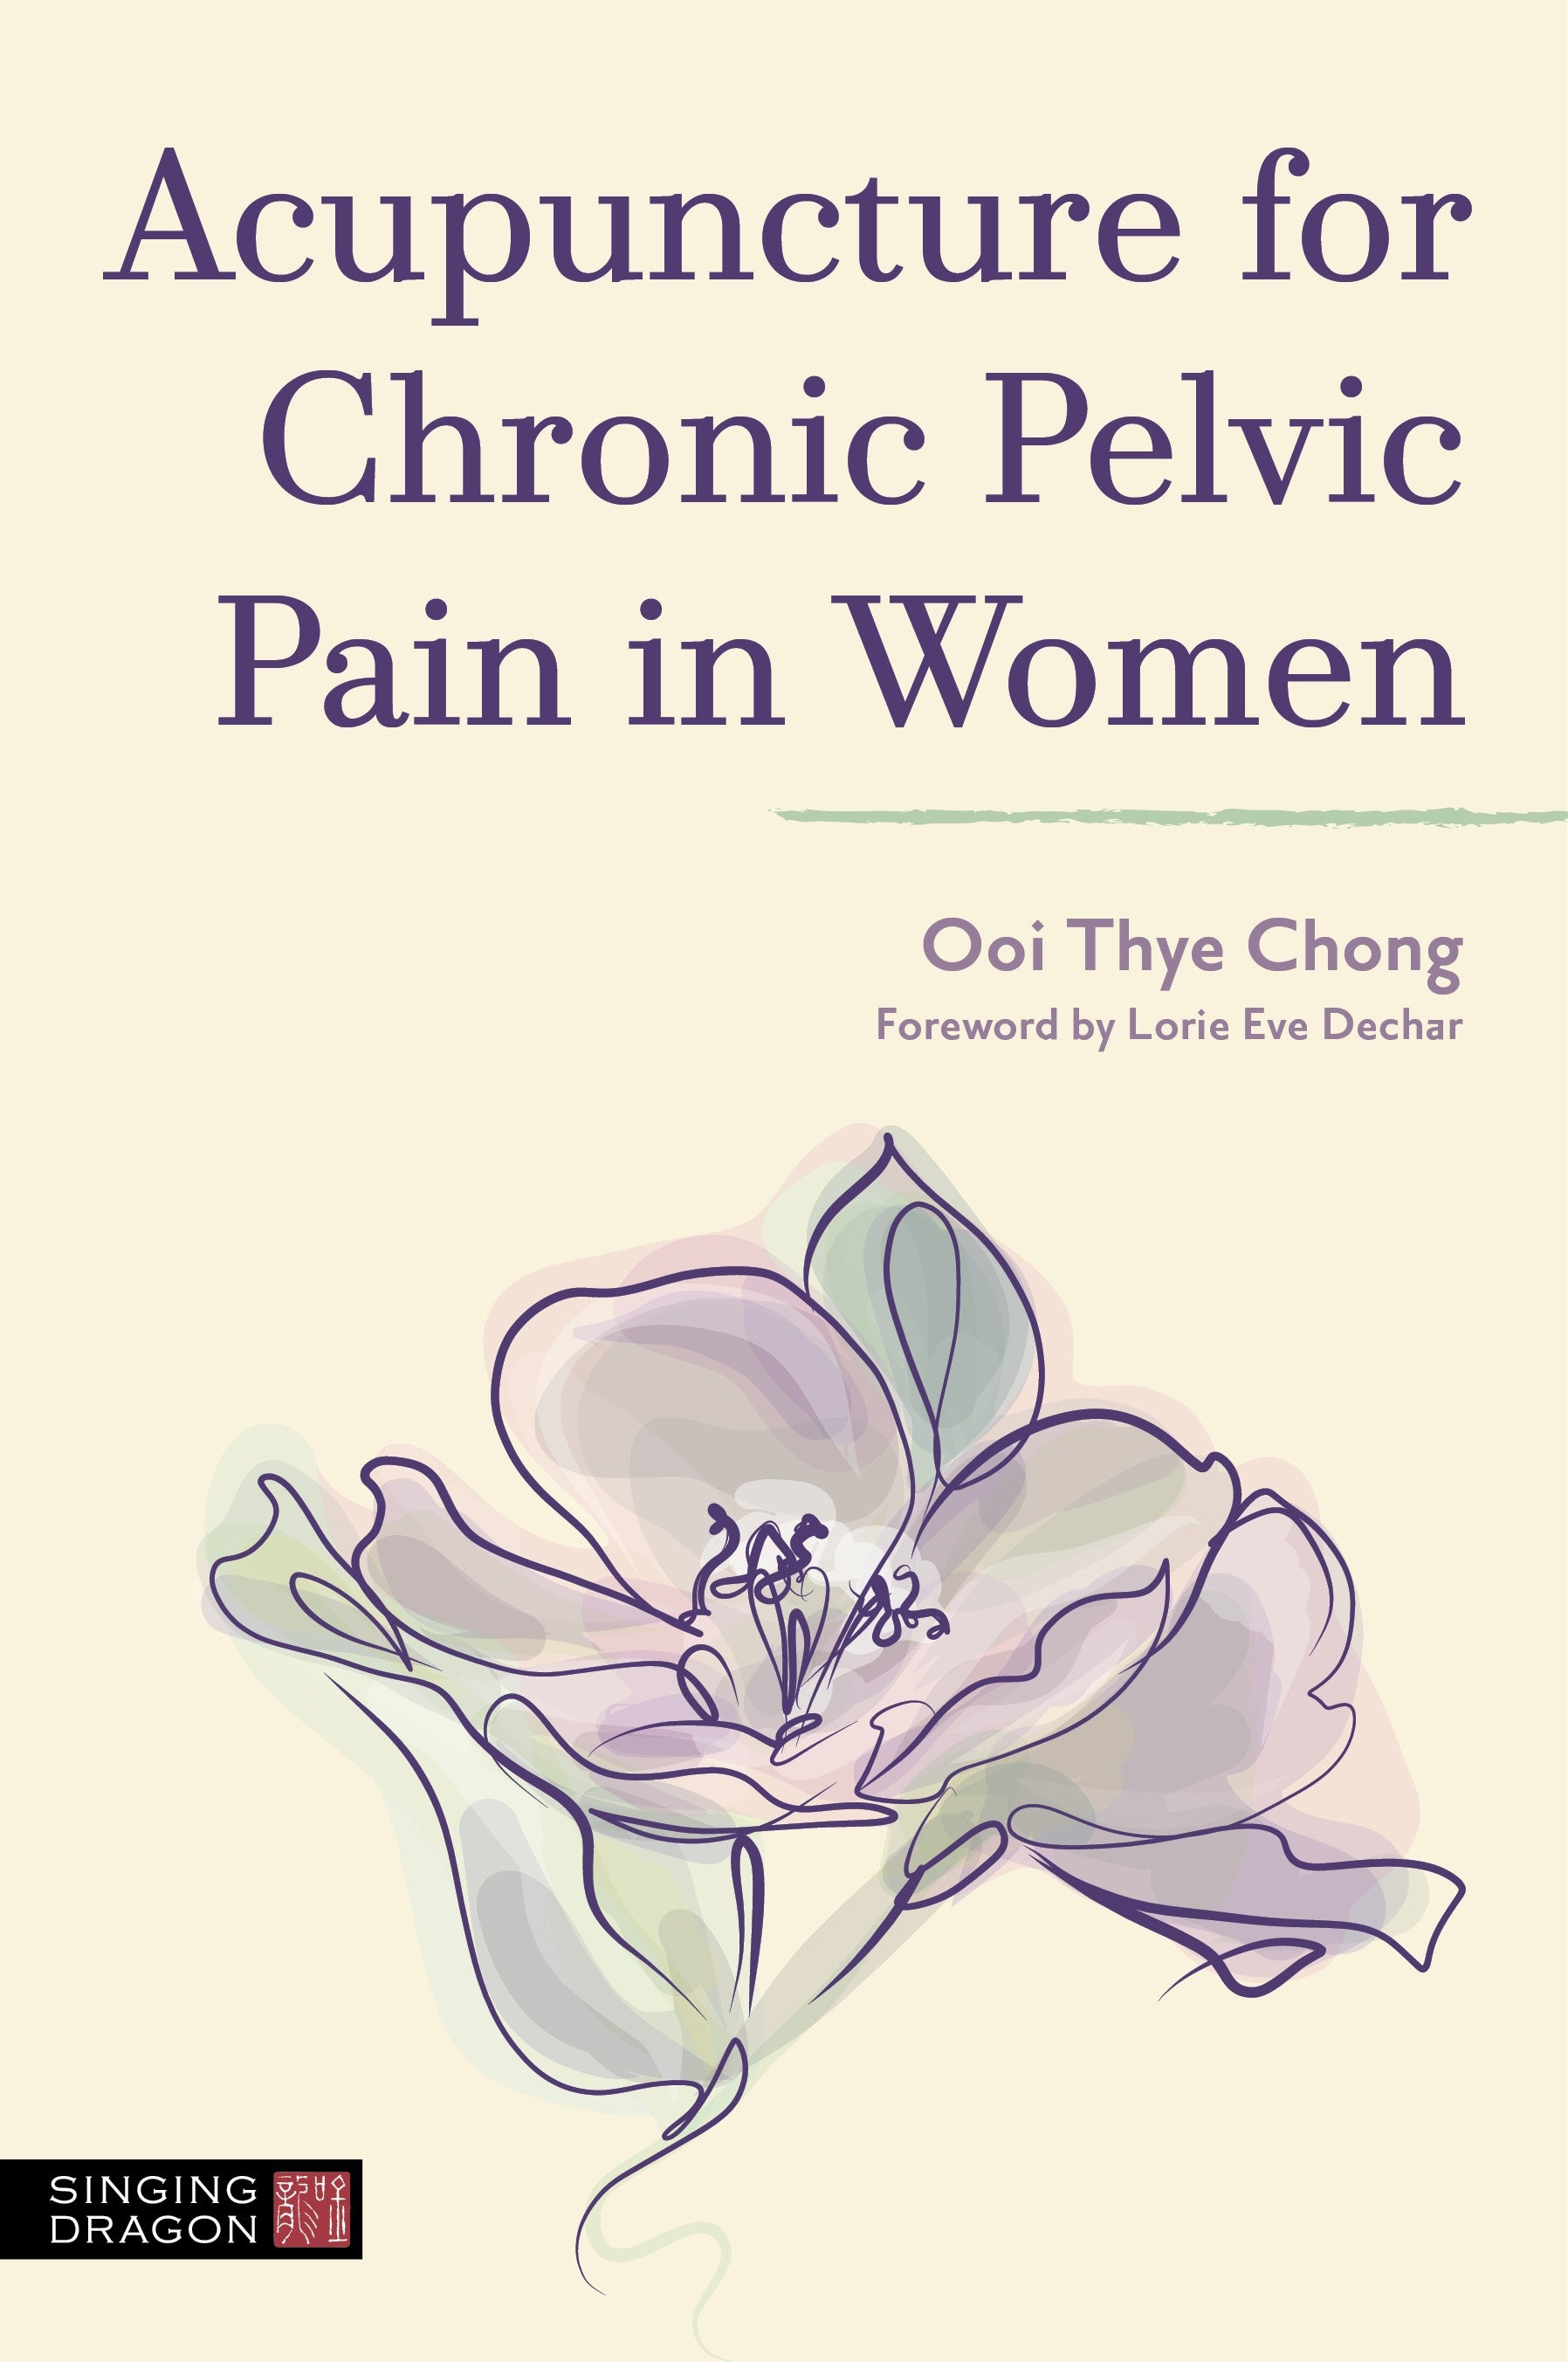 Acupuncture for Chronic Pelvic Pain in Women by Ooi Thye Chong